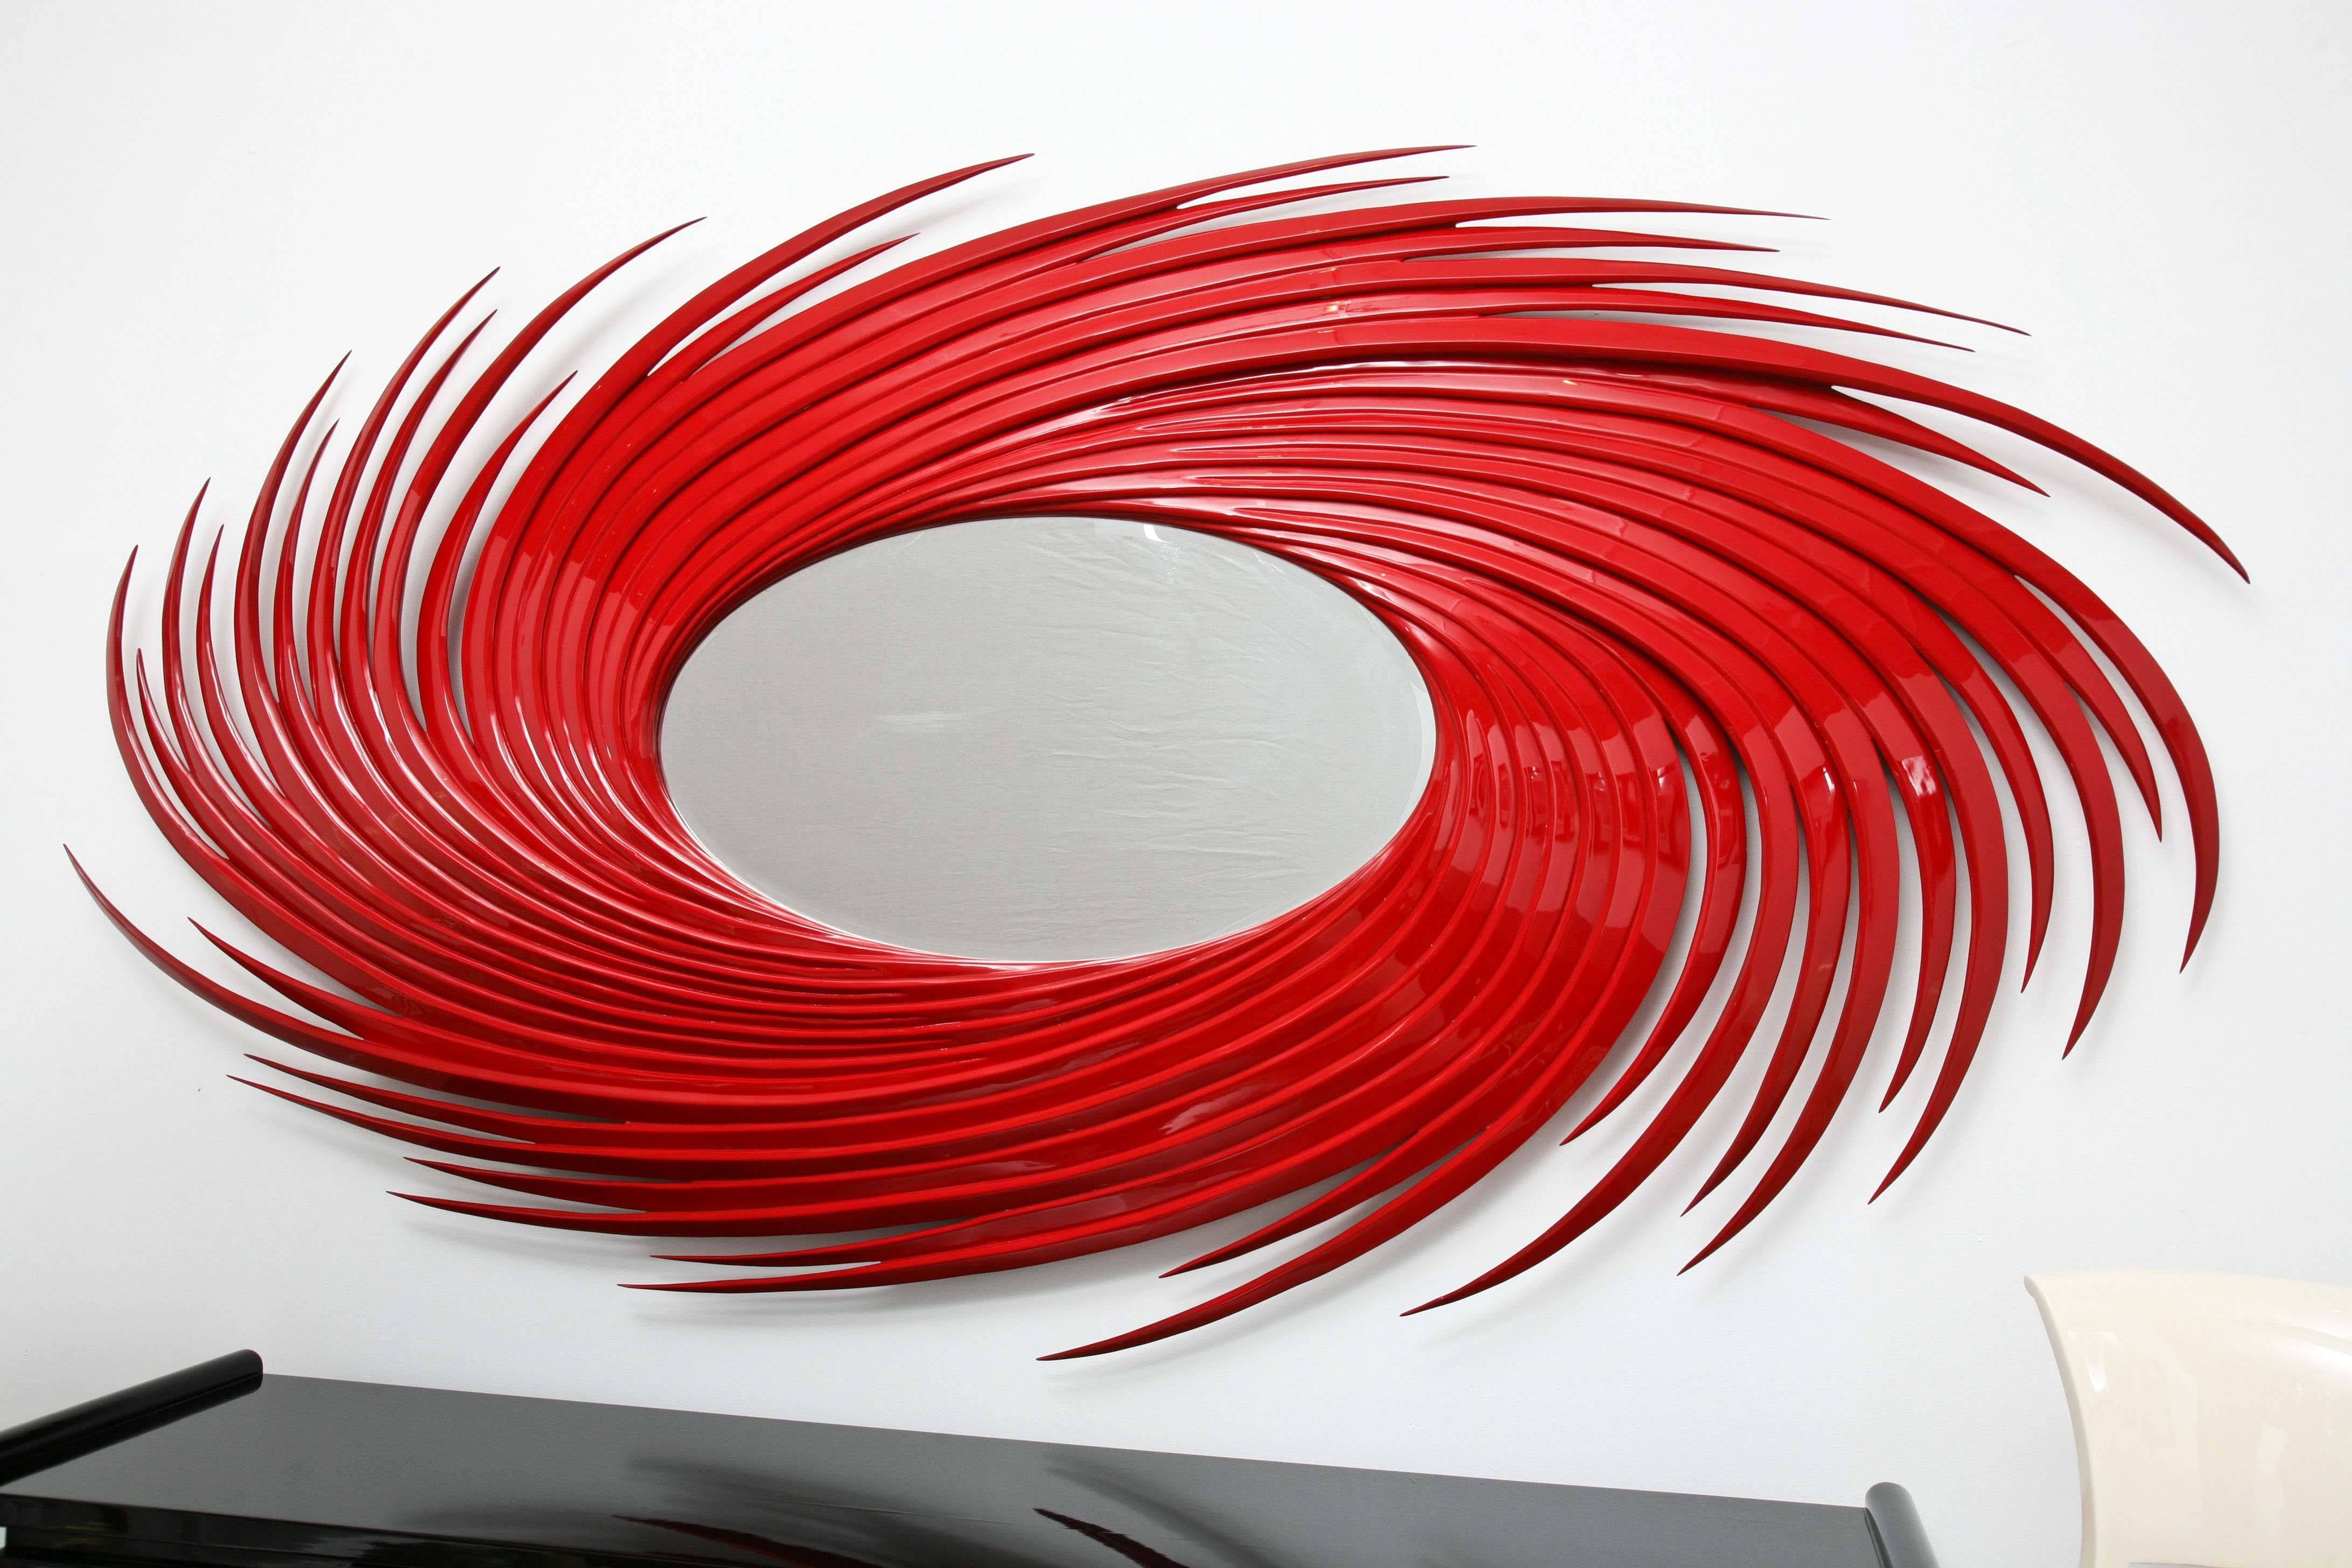 Red lacquer mirror by Christopher Guy inspired by the motion and depiction of a hurricane. The mirror is gigantic in scale - a real statement piece.